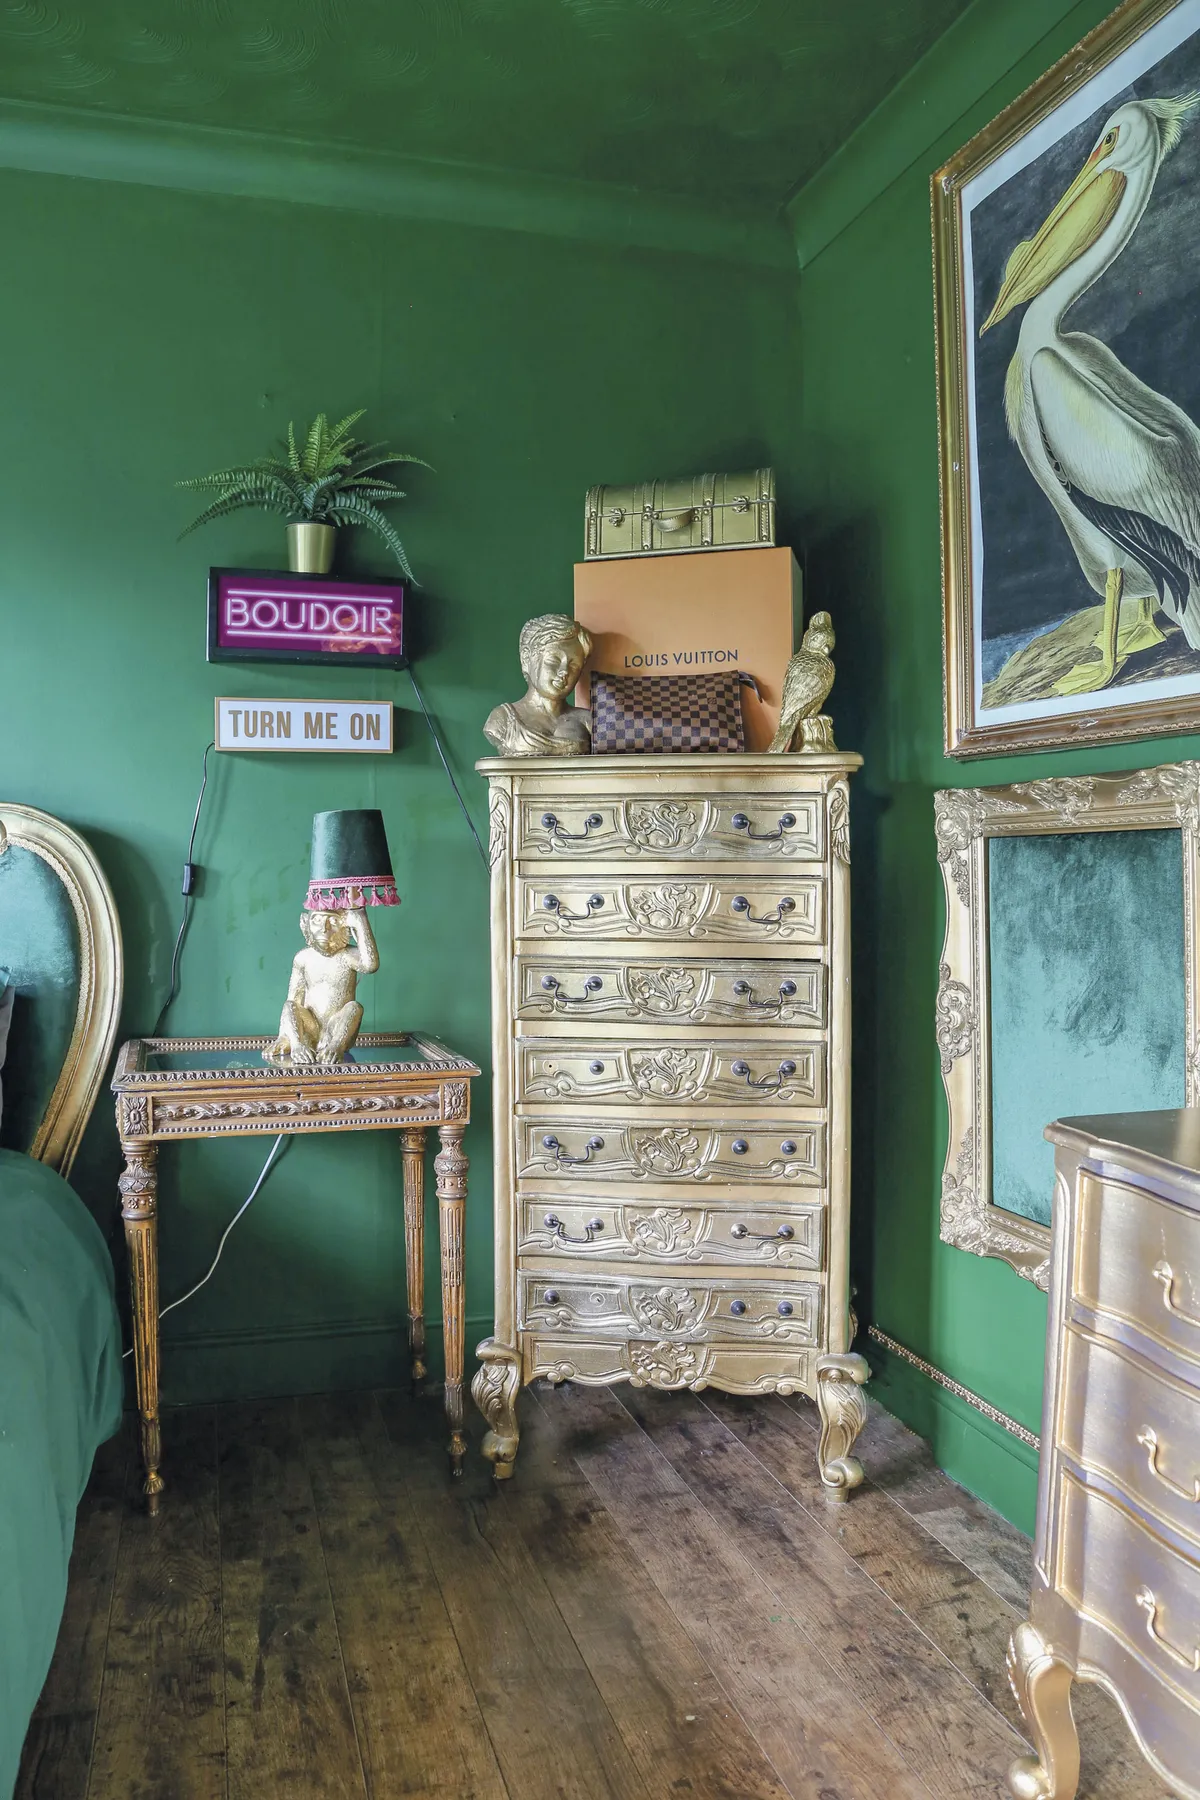 Hayley painted her entire bedroom – ceiling included – in her favourite colour, green, which she had mixed to the perfect shade at B&Q